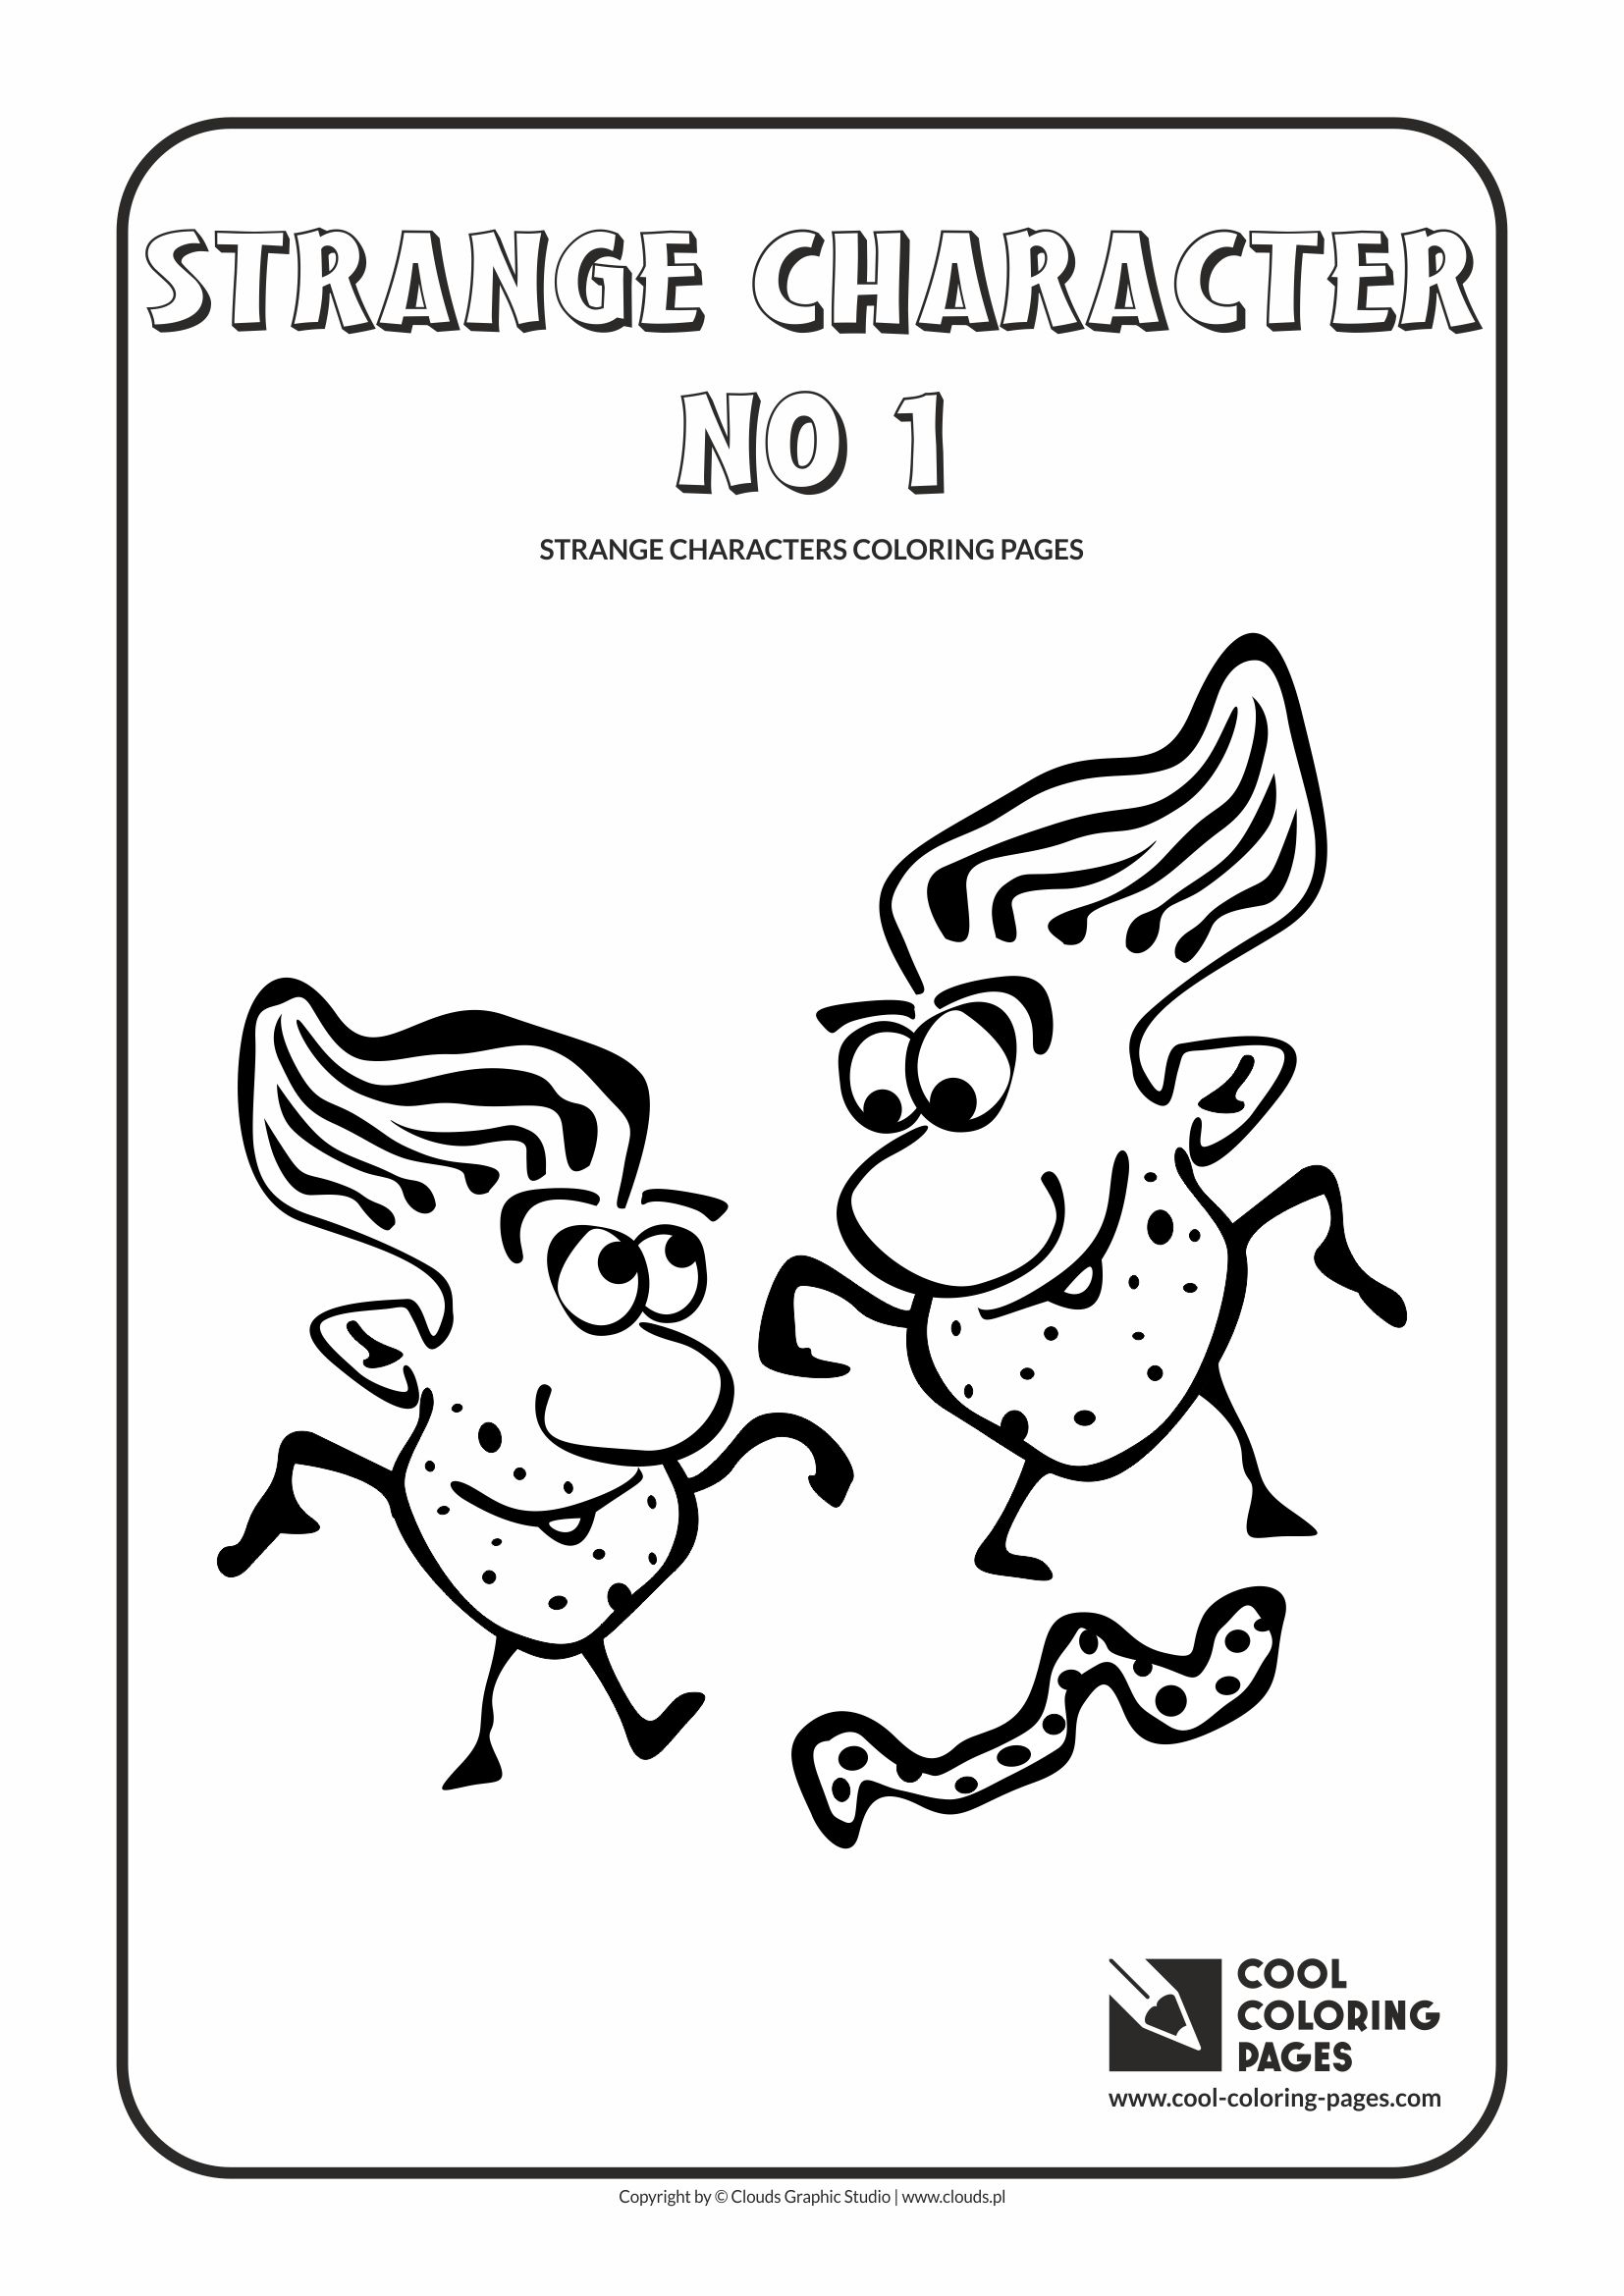 Cool Coloring Pages - Others / Strange character no 1 / Coloring page with strange character no 1